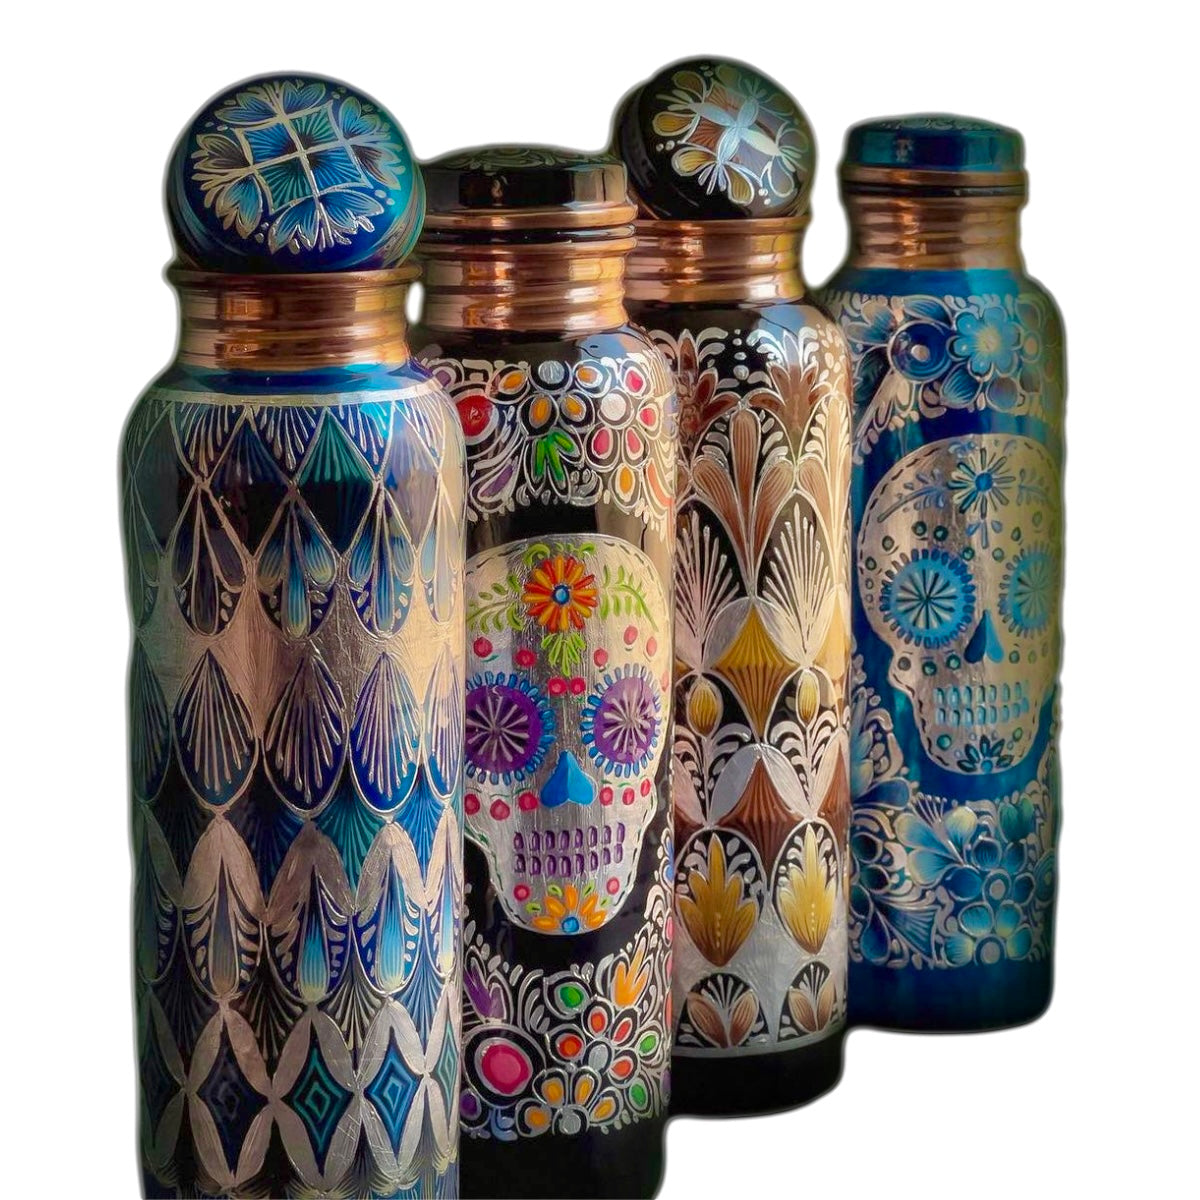 Mexican Copper 1 L / 33 oz. Water Bottle- Hand Painted Skulls CoLores Decor